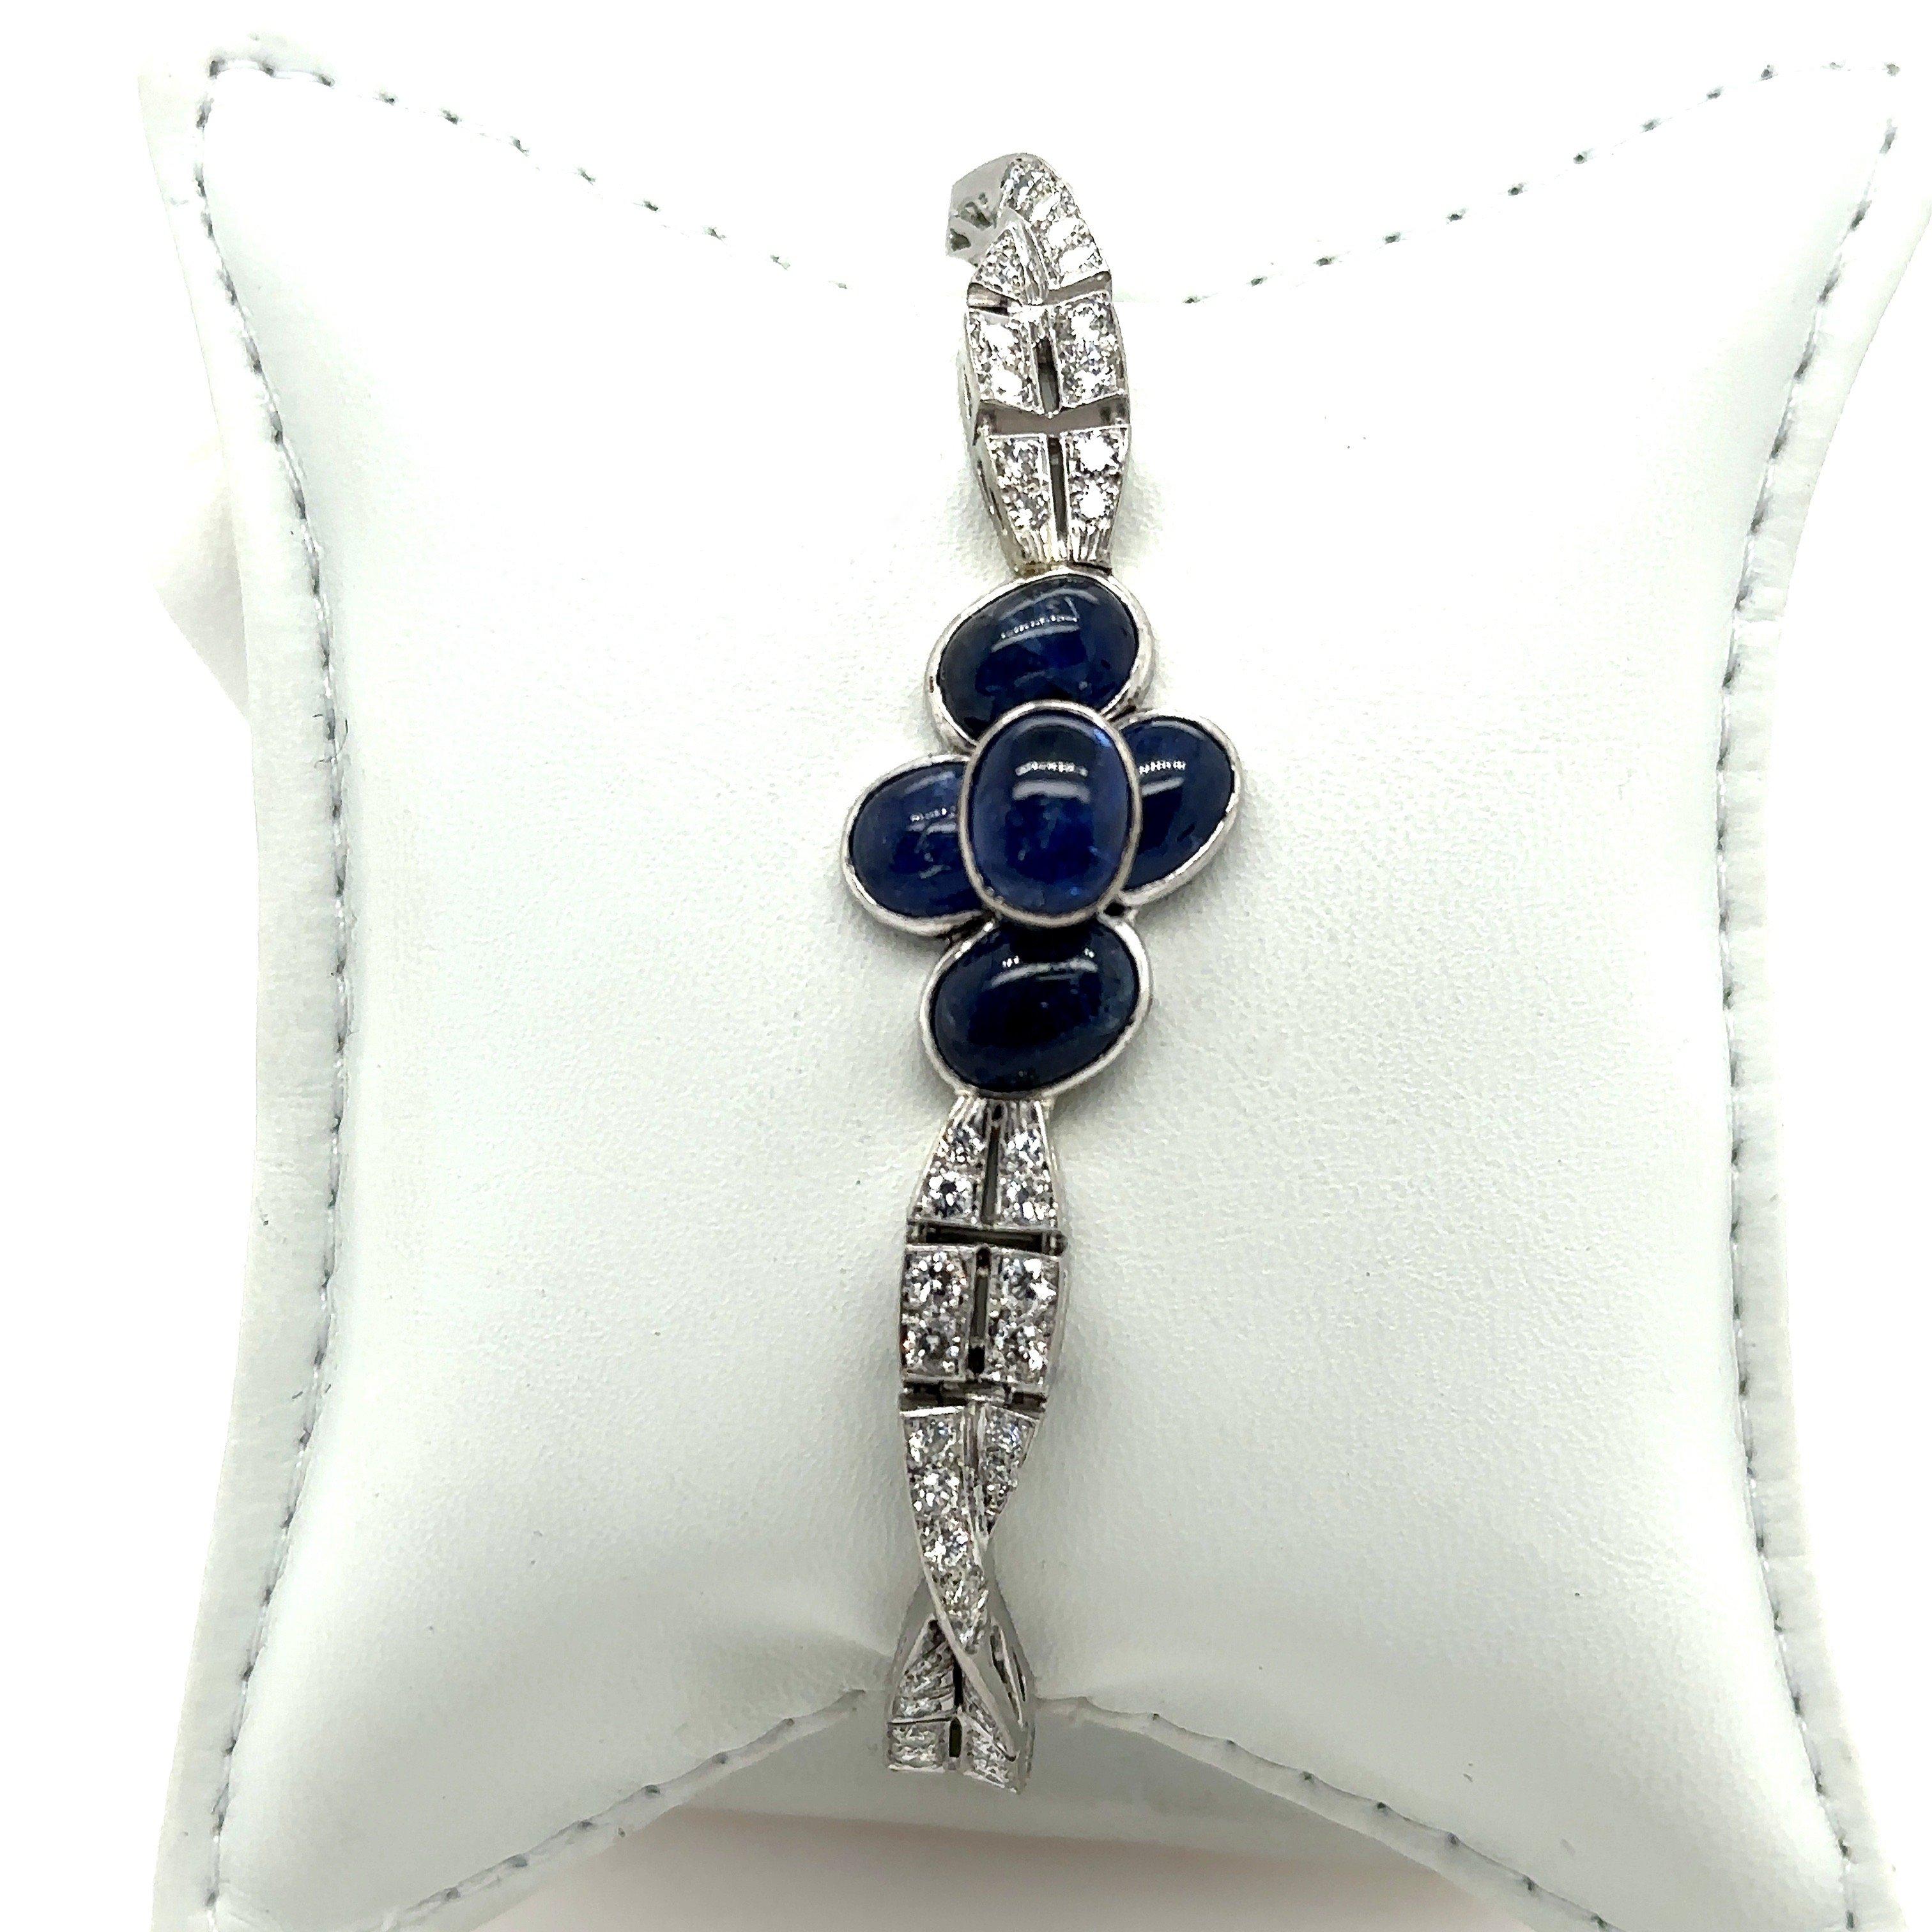 This vintage bracelet dates from the 1950’s. It’s crafted in platinum and features five bezel-set oval blue cabochon sapphires at the center that weight approximately 5.10 carats. The center of the bracelet measures approximately  15.7mm at the